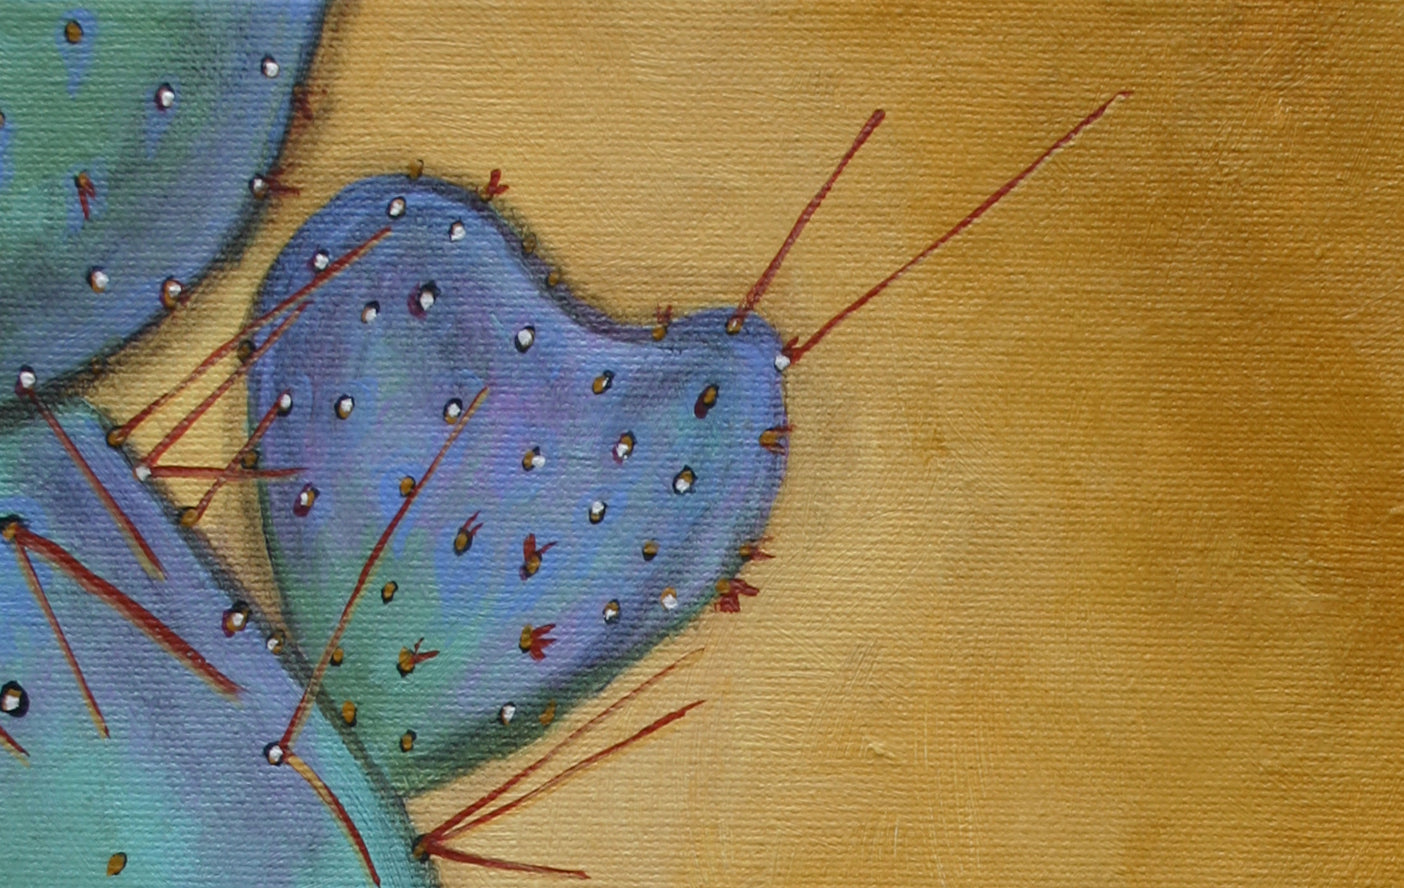 Prickly Valentine, Handle With Care, mexican folk art print on lustre photo paper, unmatted or matted